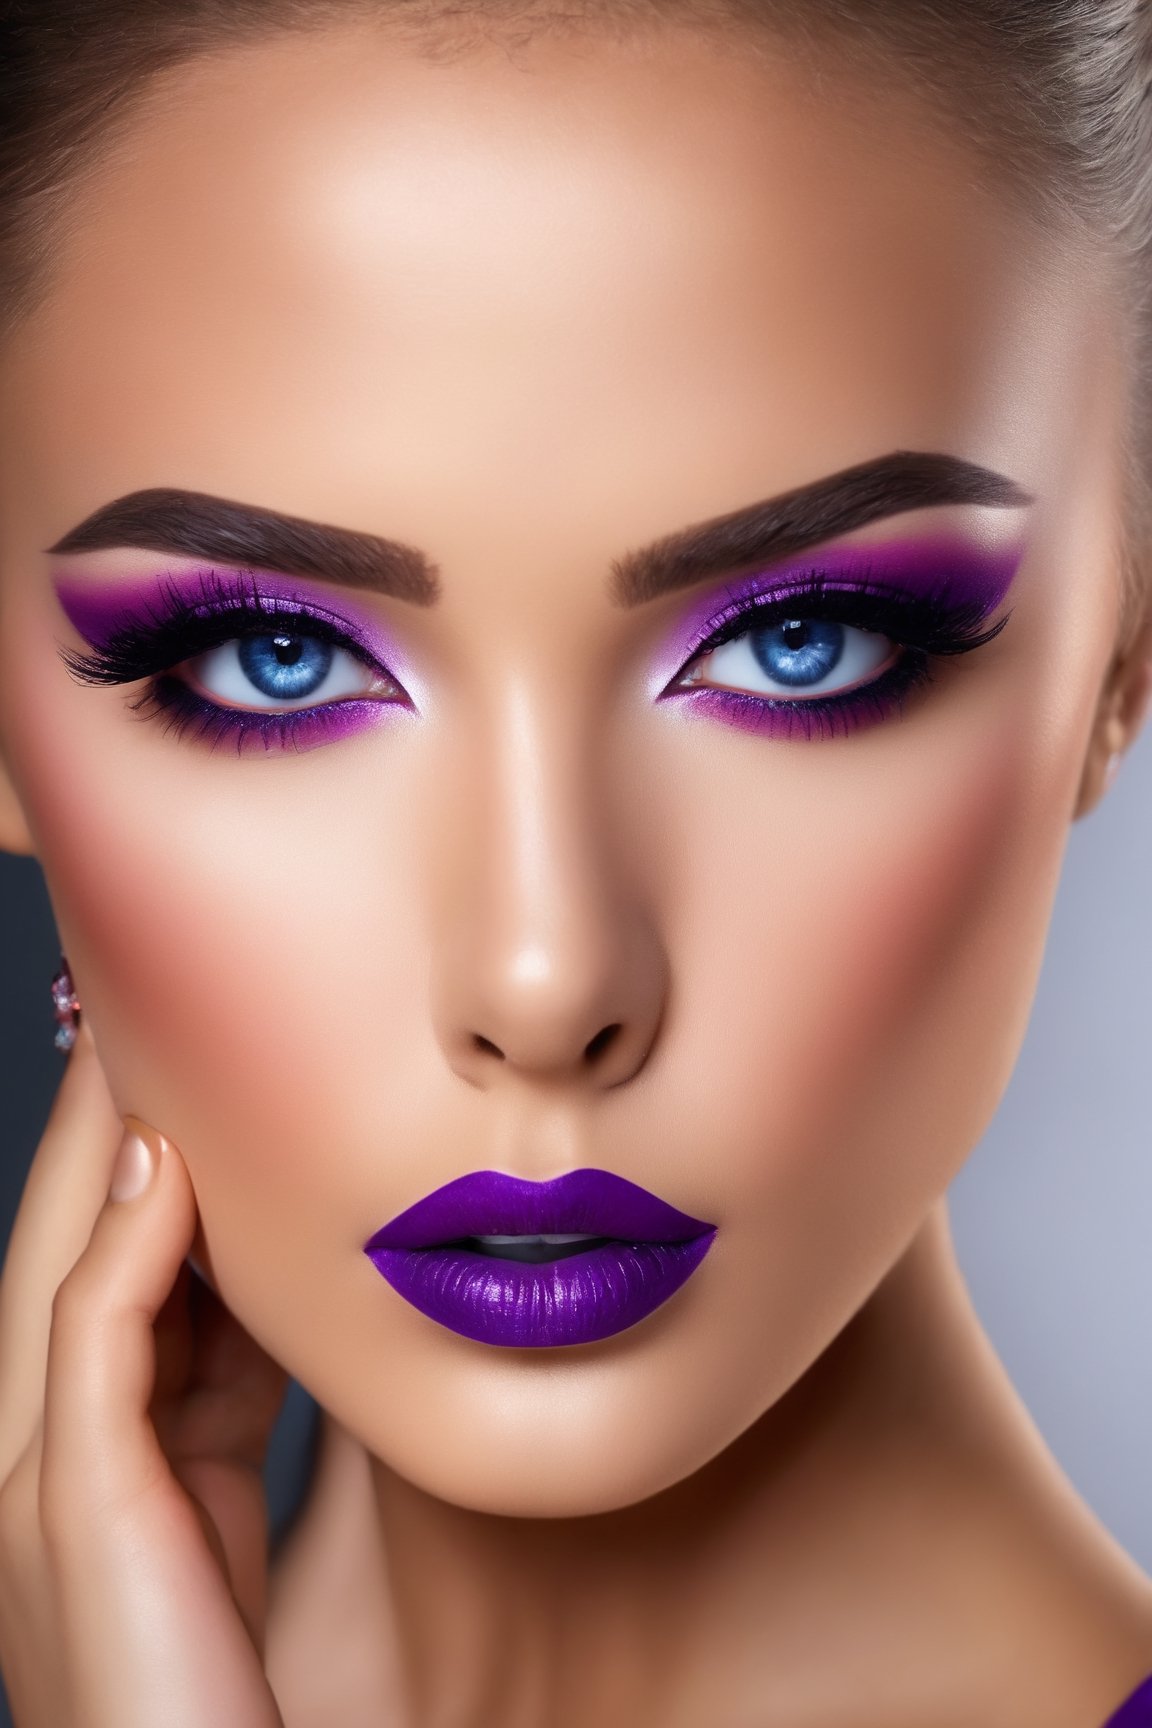 (best quality,4k,8k,highres,masterpiece:1.2),ultra-detailed,(realistic,photorealistic,photo-realistic:1.37),beautiful woman,makeup,detailed eyes,detailed lips,purple lipstick,close-up portrait,soft lighting,vibrant colors,purple color scheme,high-resolution details,hair strands,smoky eyeshadow,shimmering highlights,elaborate eyelashes,flawless complexion,feminine features,expressive gaze,subtle blush,natural eyebrows,feminine beauty,extraordinary realistic textures,meticulous attention to detail,professional photography,studio lighting,masterful makeup application,artistic expression,striking visual impact,8k resolution,impeccable facial features,mesmerizing intensity,perspective from below,sharp focus,endless visual depth,magical ambiance.